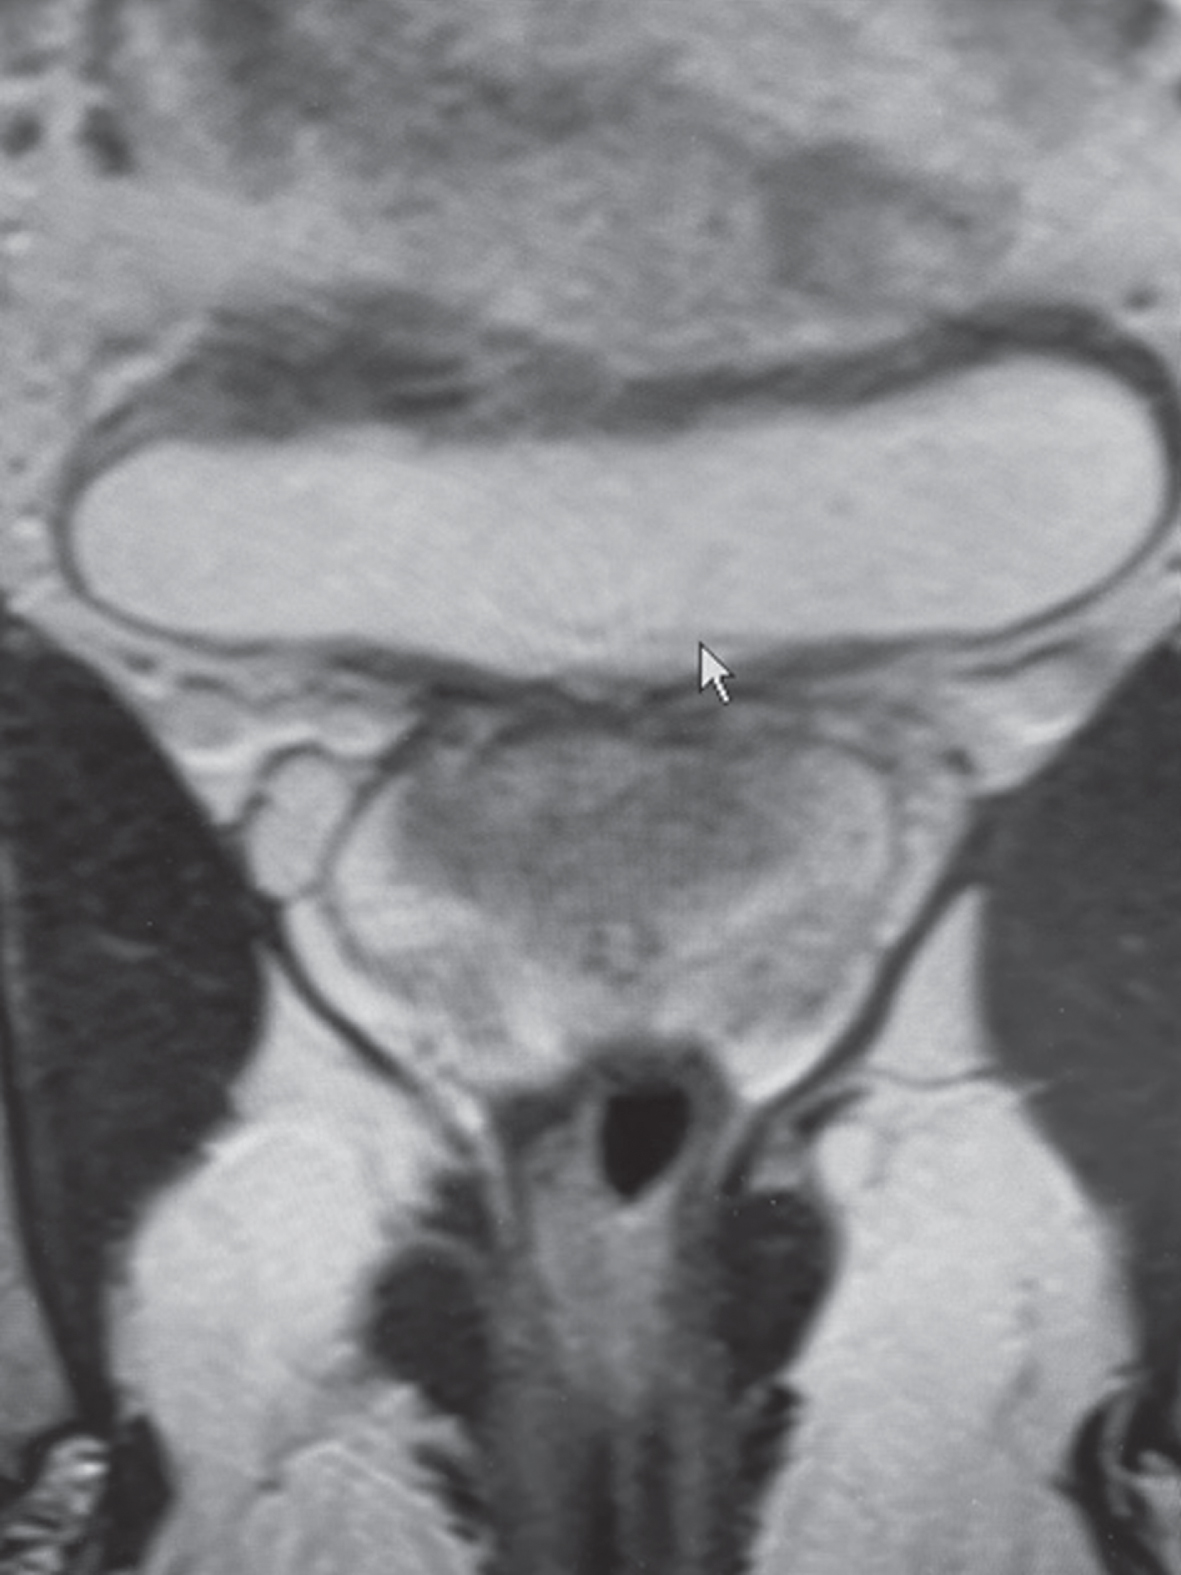 MRI indicating a small area of thickening of the bladder wall with an invasive bladder cancer being one of the alternatives.